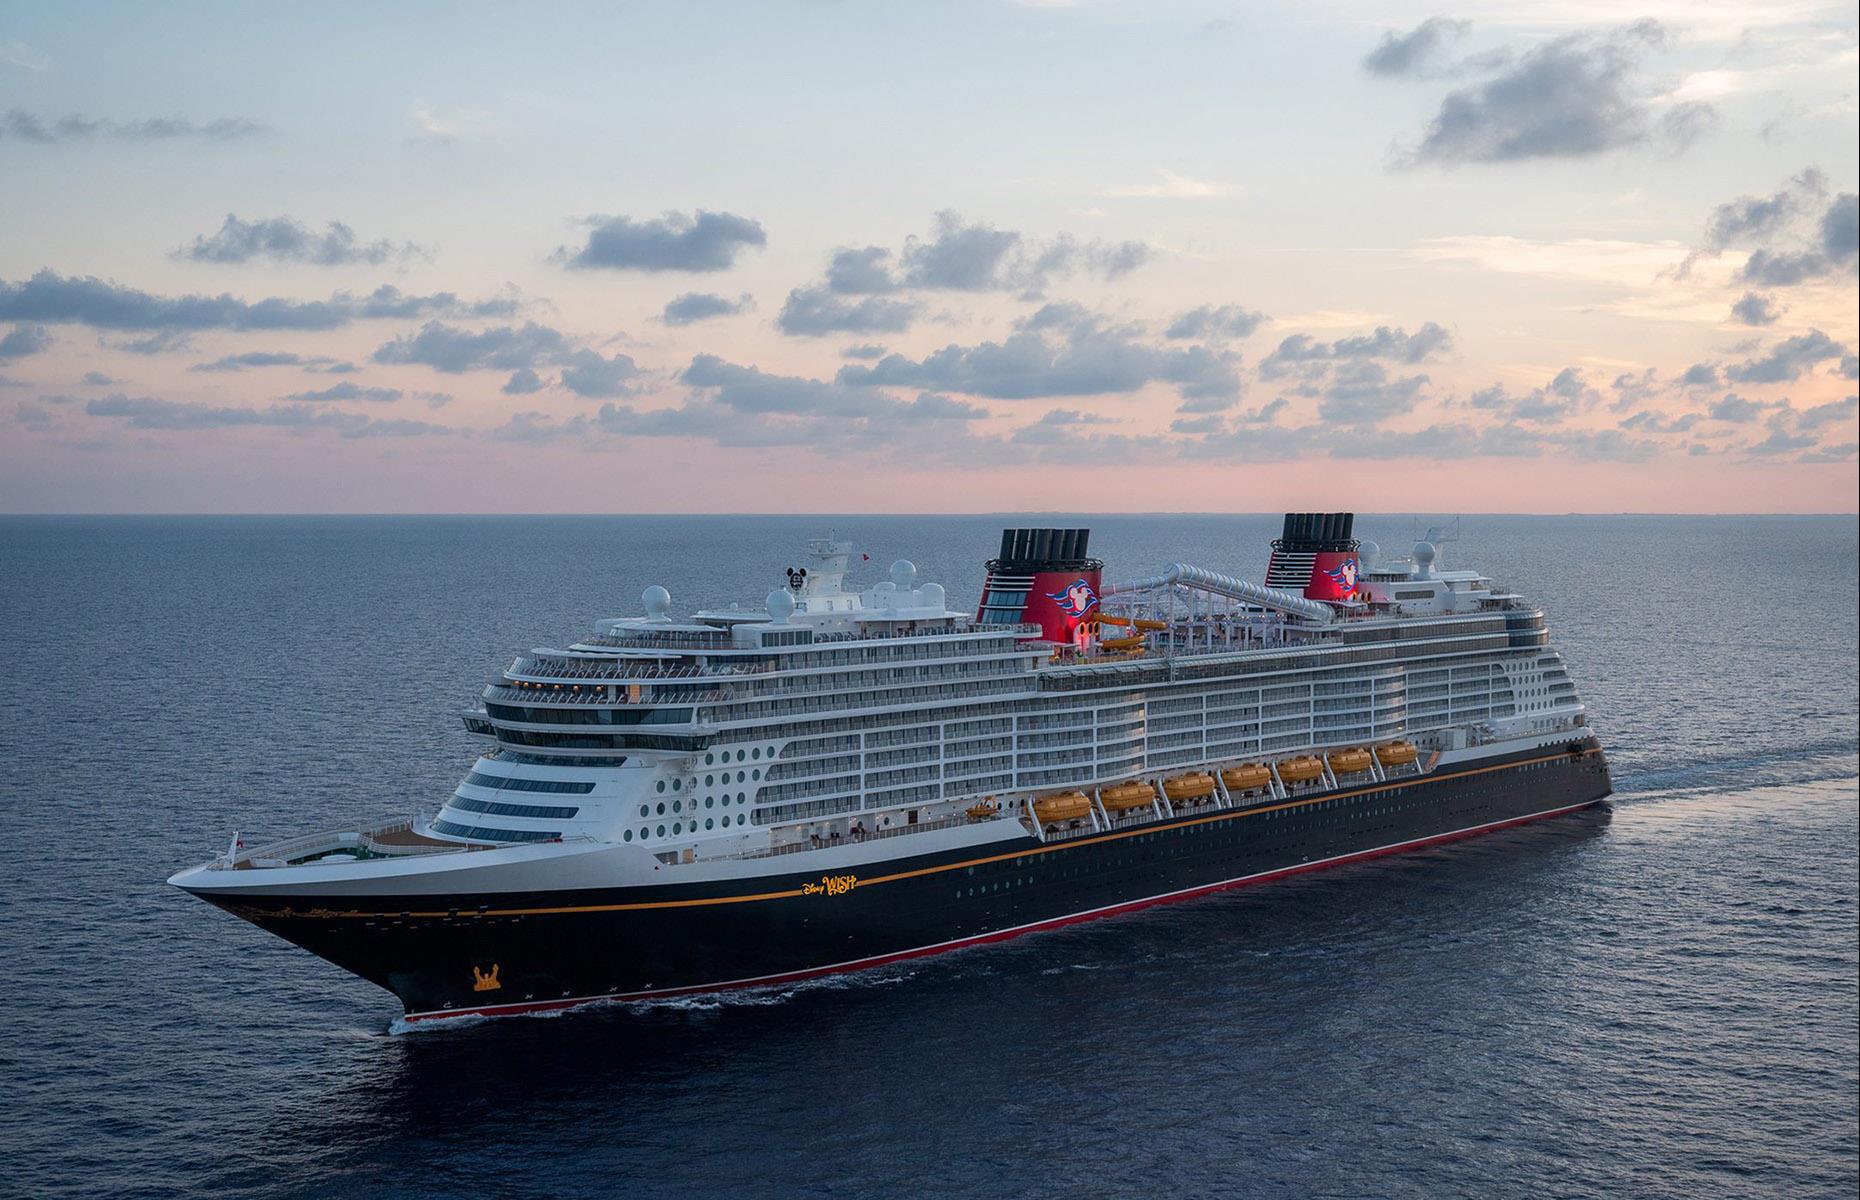 <p>Disney Wish took to the seas in 2022 as the fifth member of the Disney Cruise Line fleet. Able to accommodate 4,000 passengers, Wish offers everything you might hope for from a Disney-themed ship. Kids are well catered for with a <em>Frozen</em>-themed theatrical dining experience and immersive shows, as well as deck parties and water slides, while grown-ups can enjoy a Norwegian-style pub and Quiet Cove, an adults-only refuge with infinity pool, bar and lounge. </p>